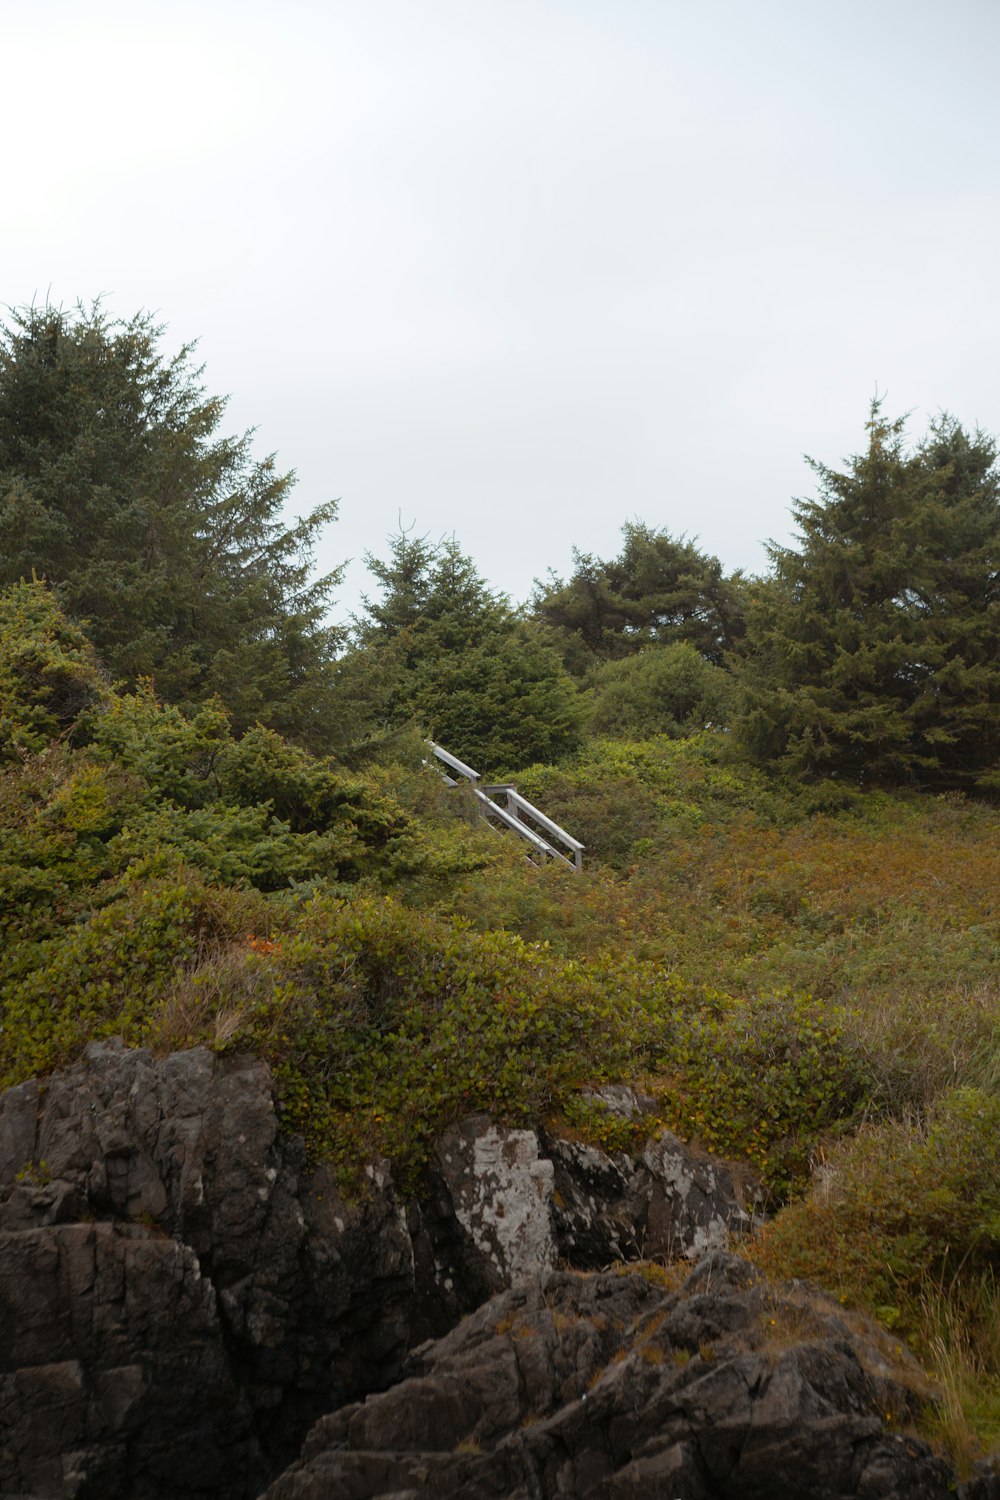 a white object in the air above a rocky area with trees